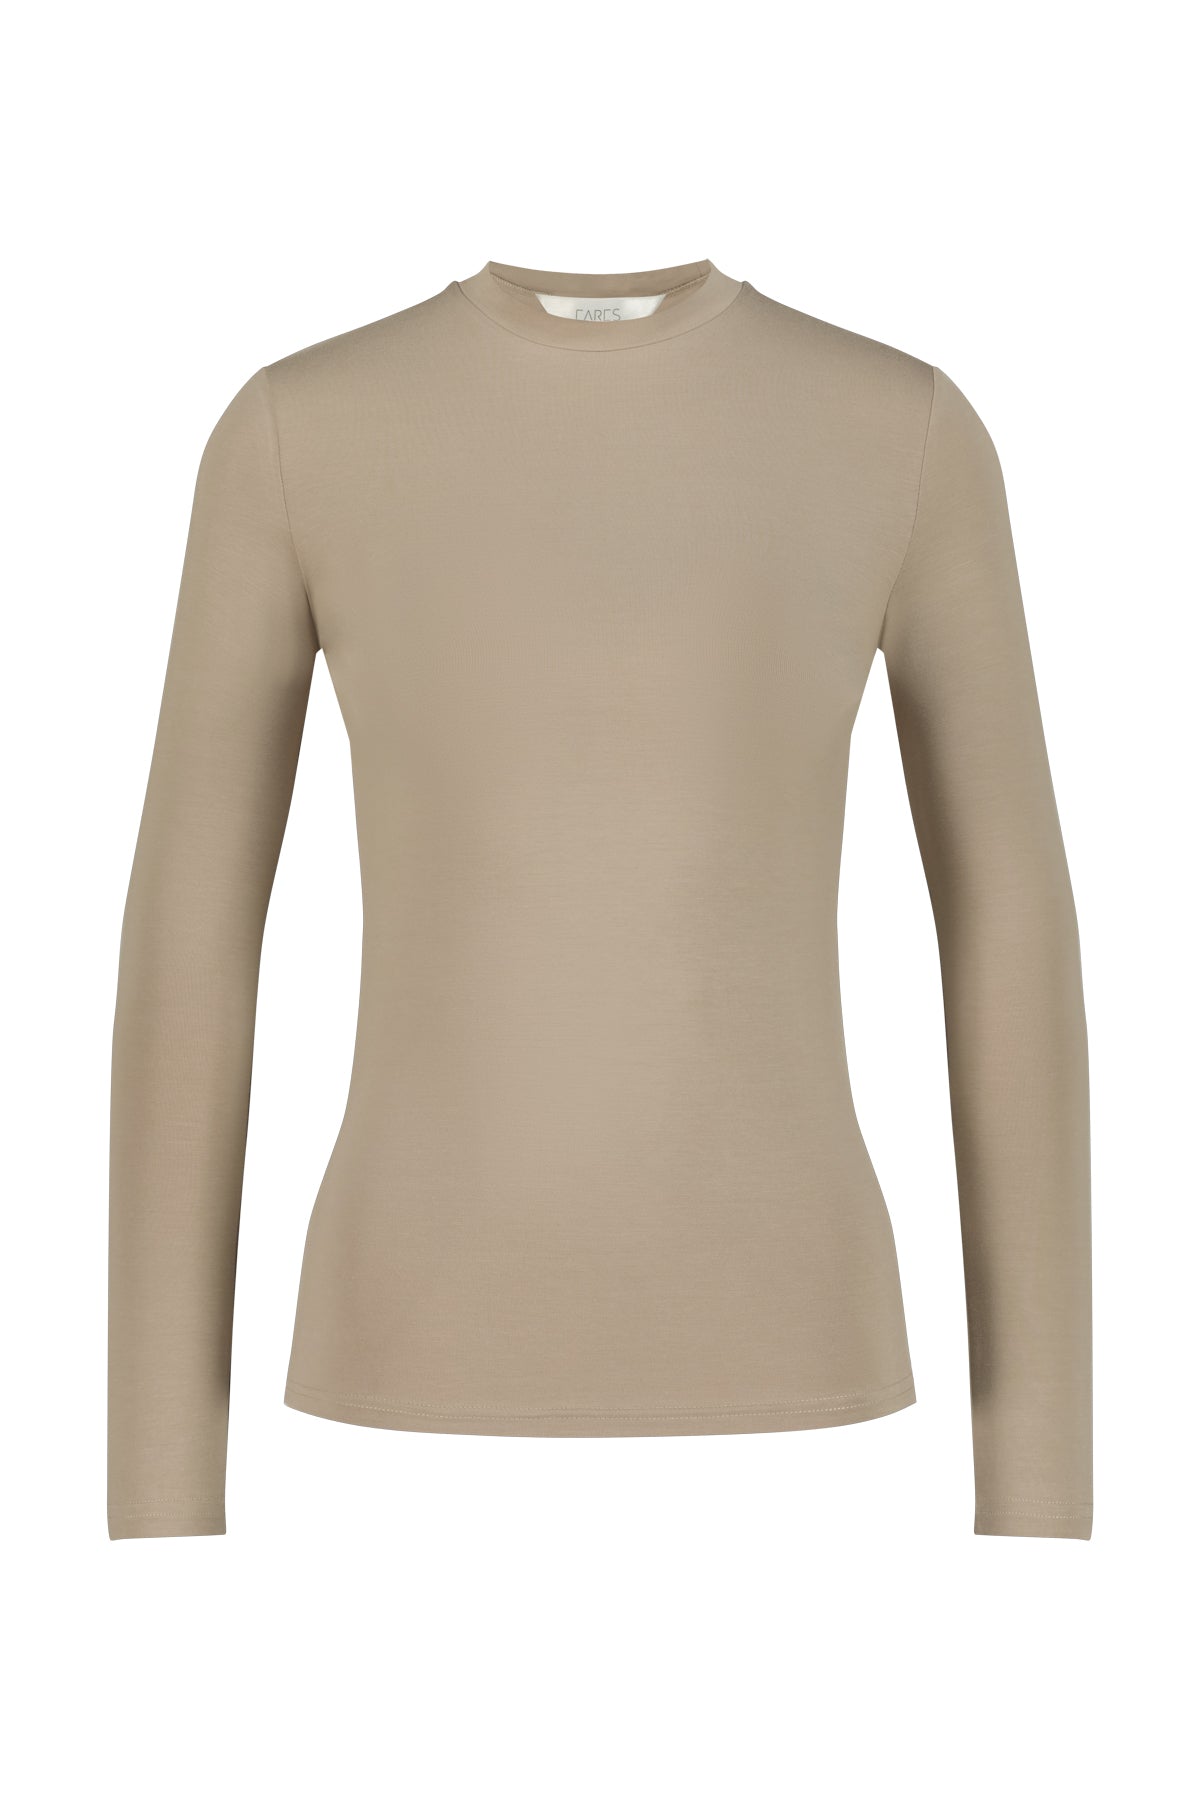 Whipped Long Sleeve in Sand